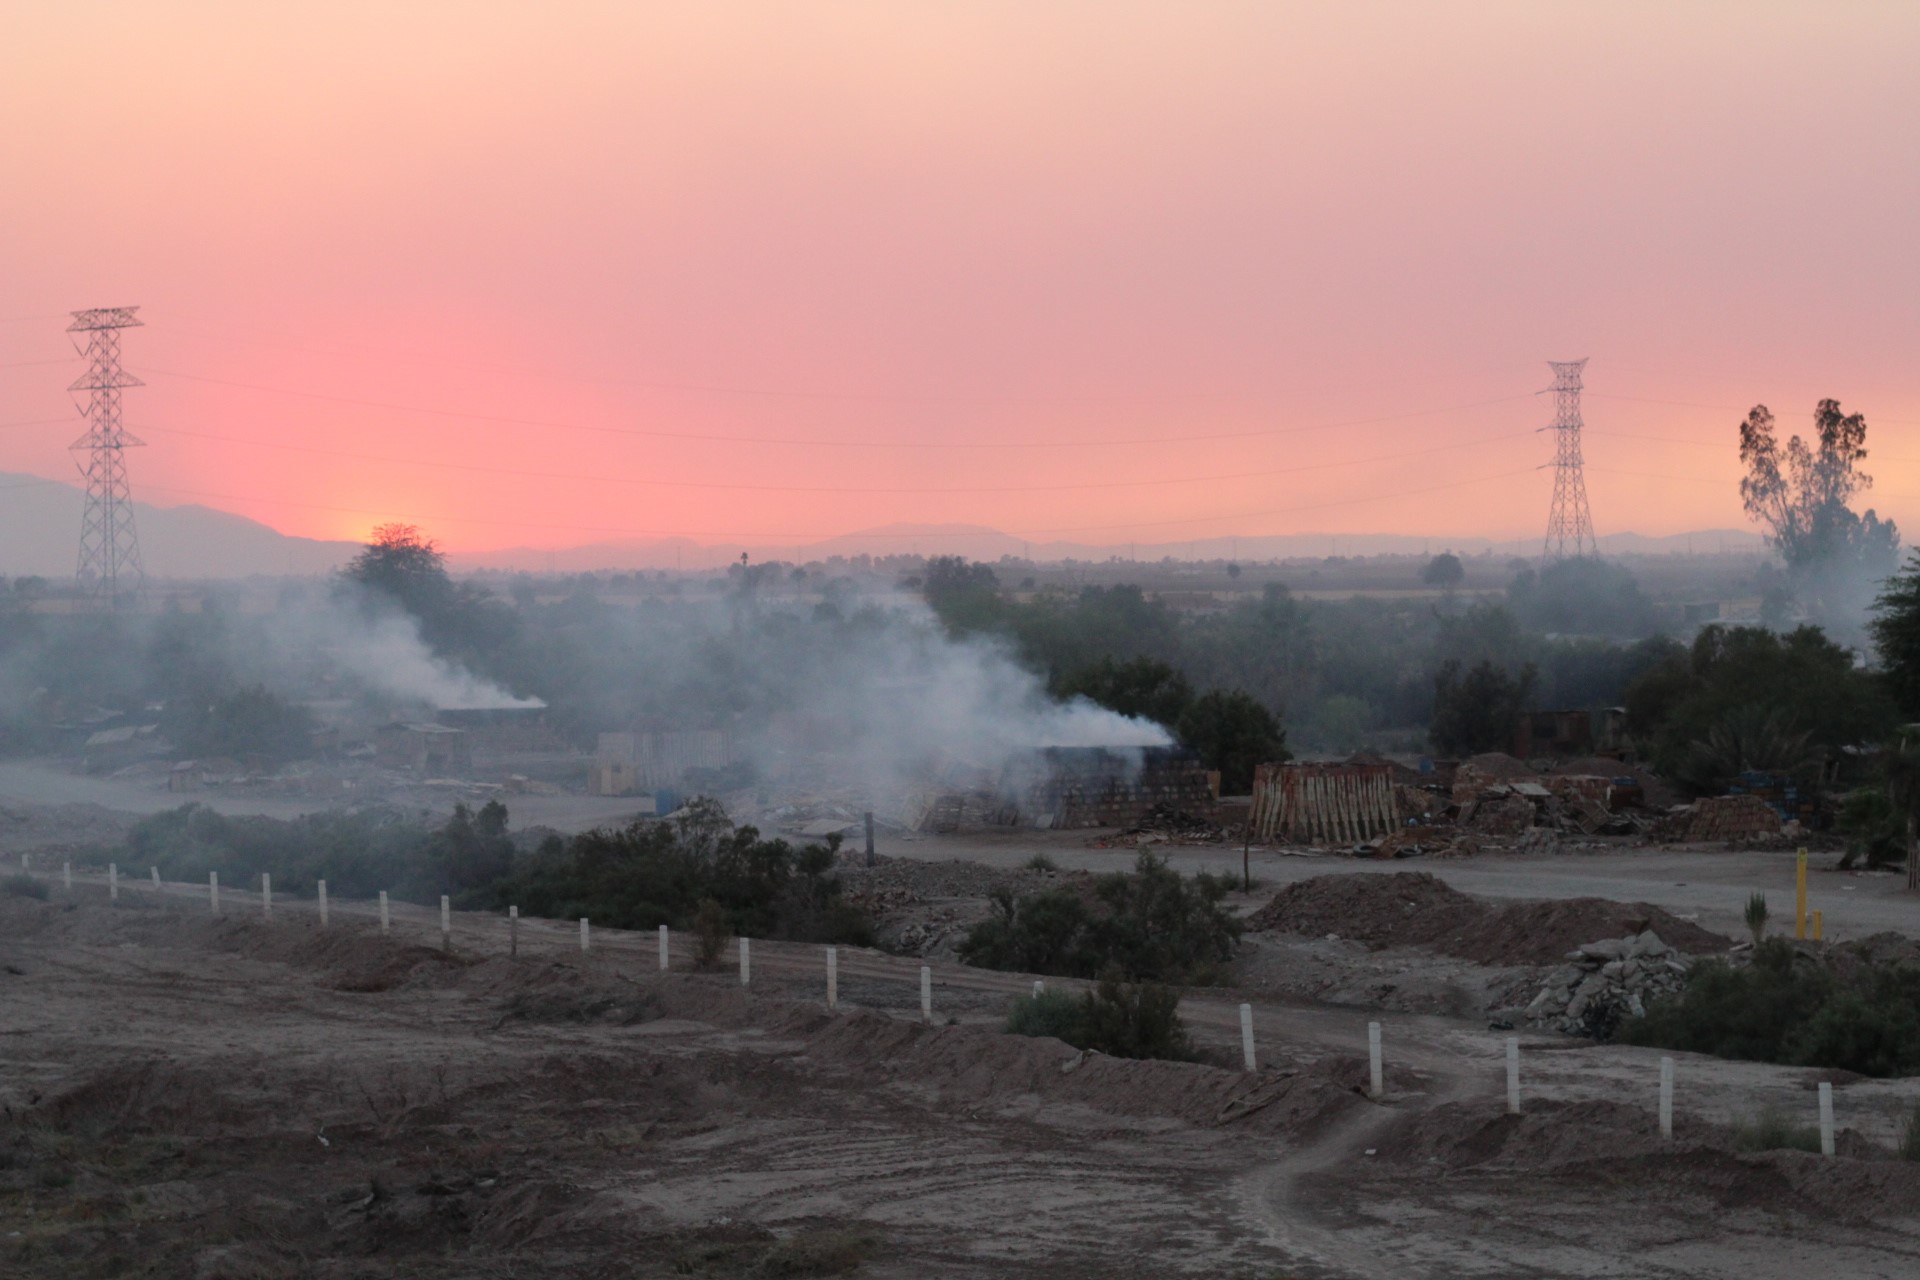 A sun sets behinds the hills of La Ladrillera Mexico. Smoke comes out of a brick kiln, covering the sunset. The foreground is a pile of dirt